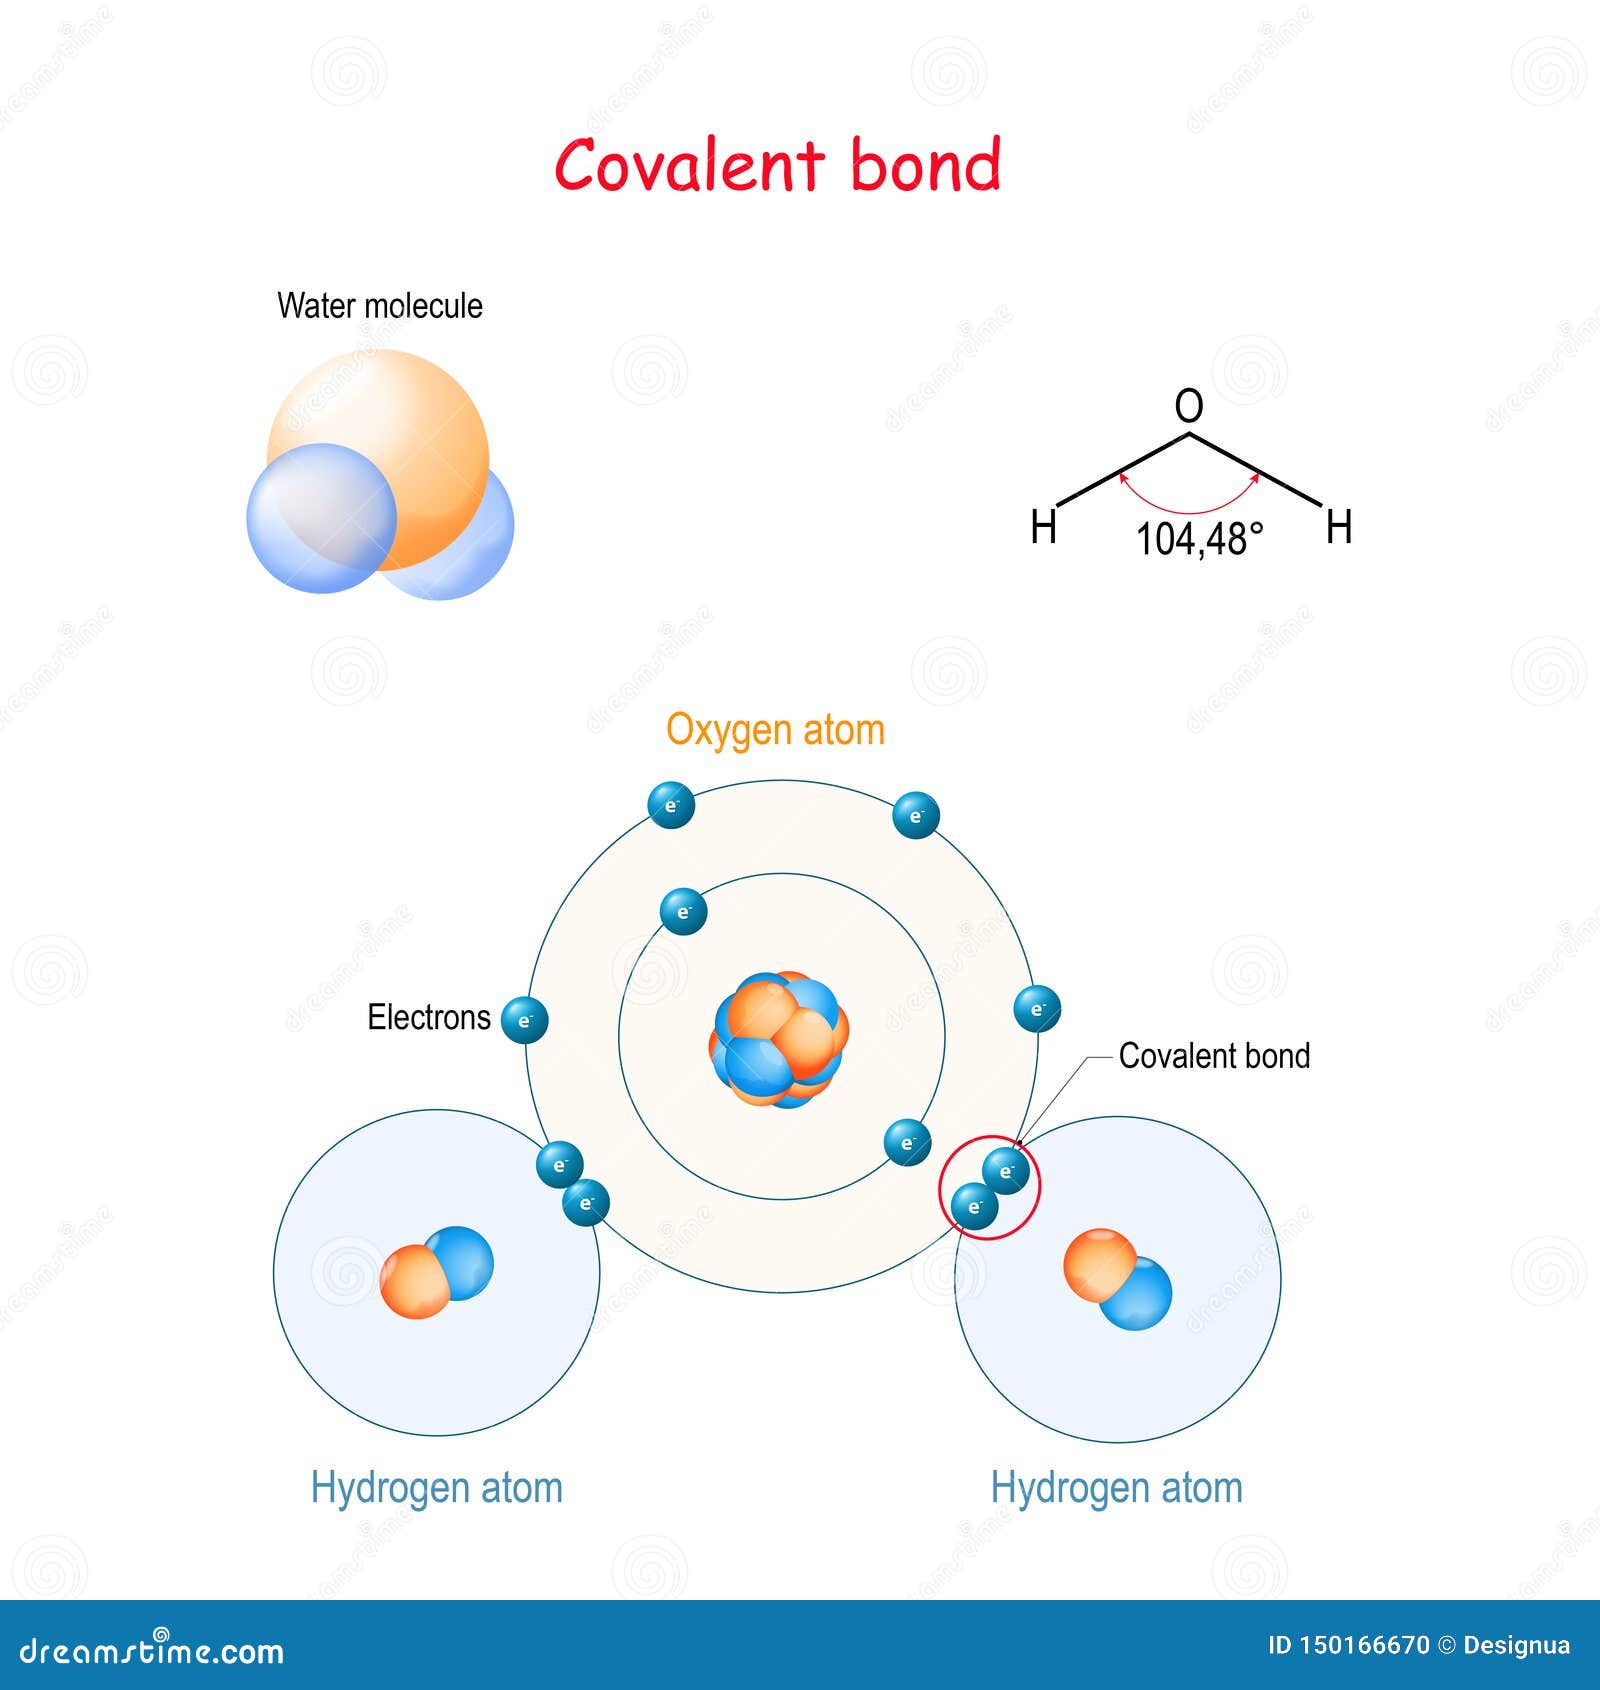 covalent bond for example heavy water molecule h2o